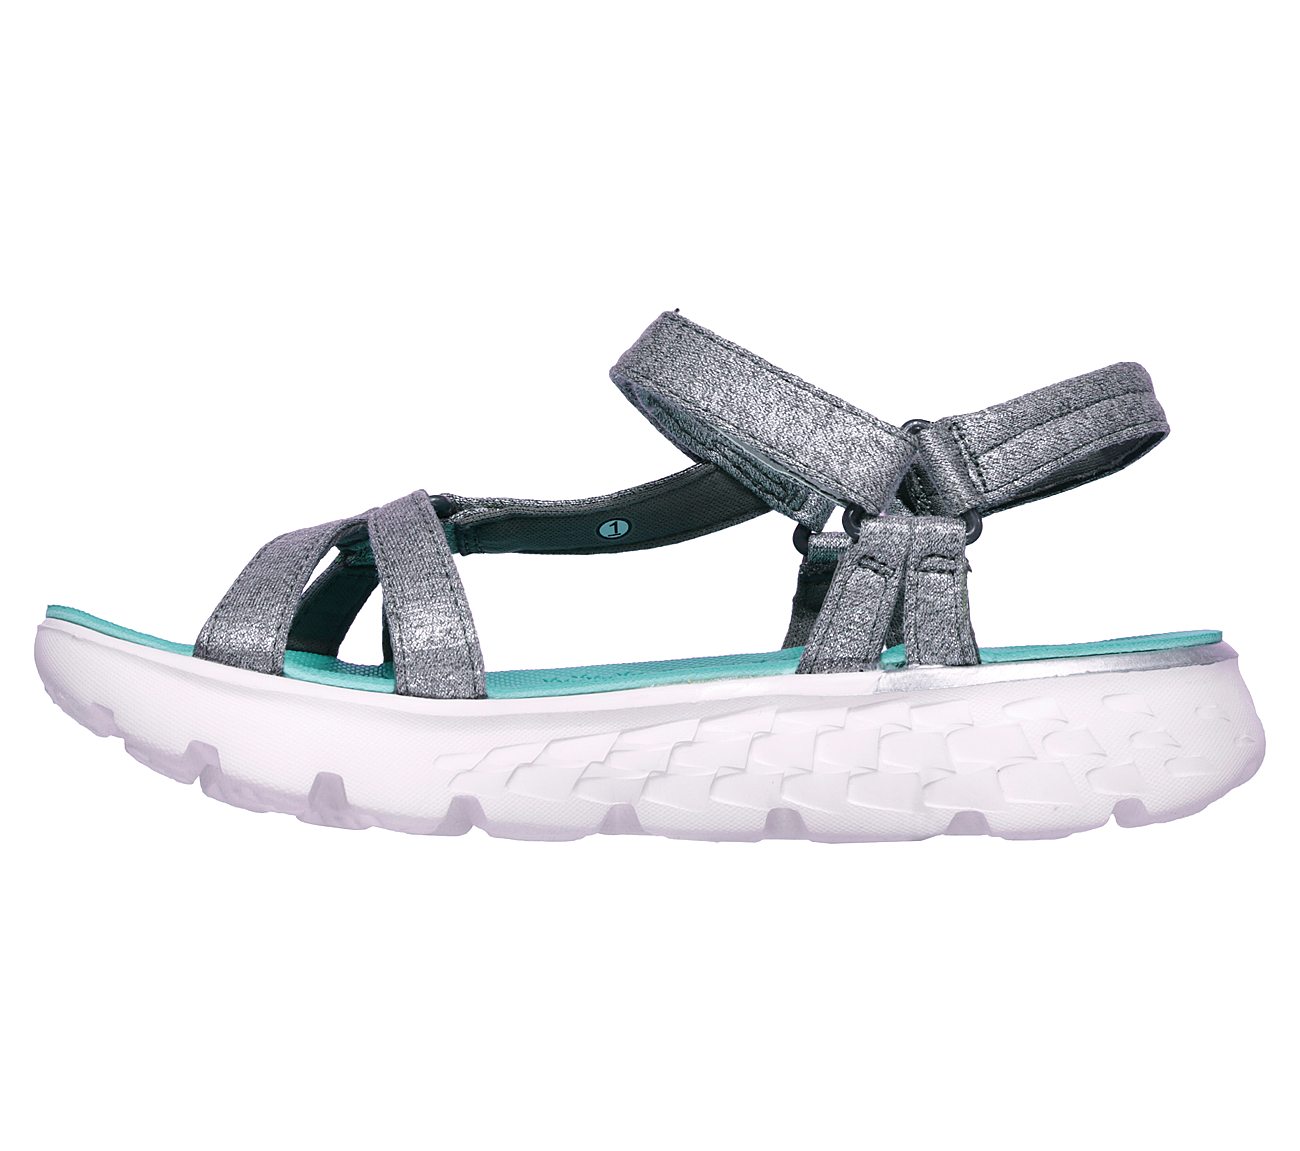 ON-THE-GO 400-LIL RADIANCE, GREY/TURQUOISE Footwear Left View